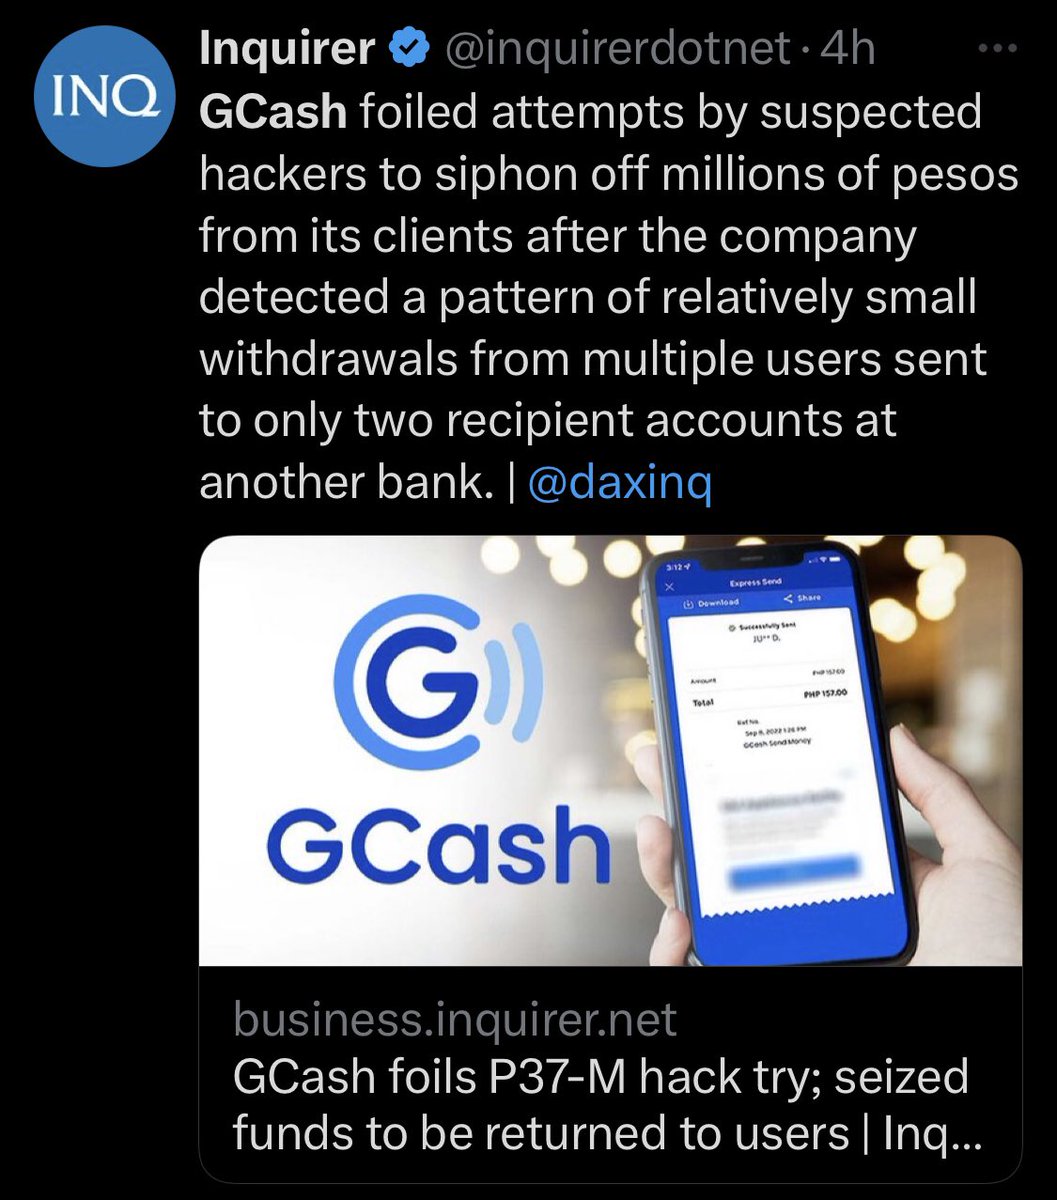 WAS GCASH HACKED? Many GCash accounts were sending small amounts or transfers to only two bank accounts - one in East West Bank and one in AUB. The good thing is, GCash detected and stopped the unauthorized transfers. But how did this happen? A thread 🧵